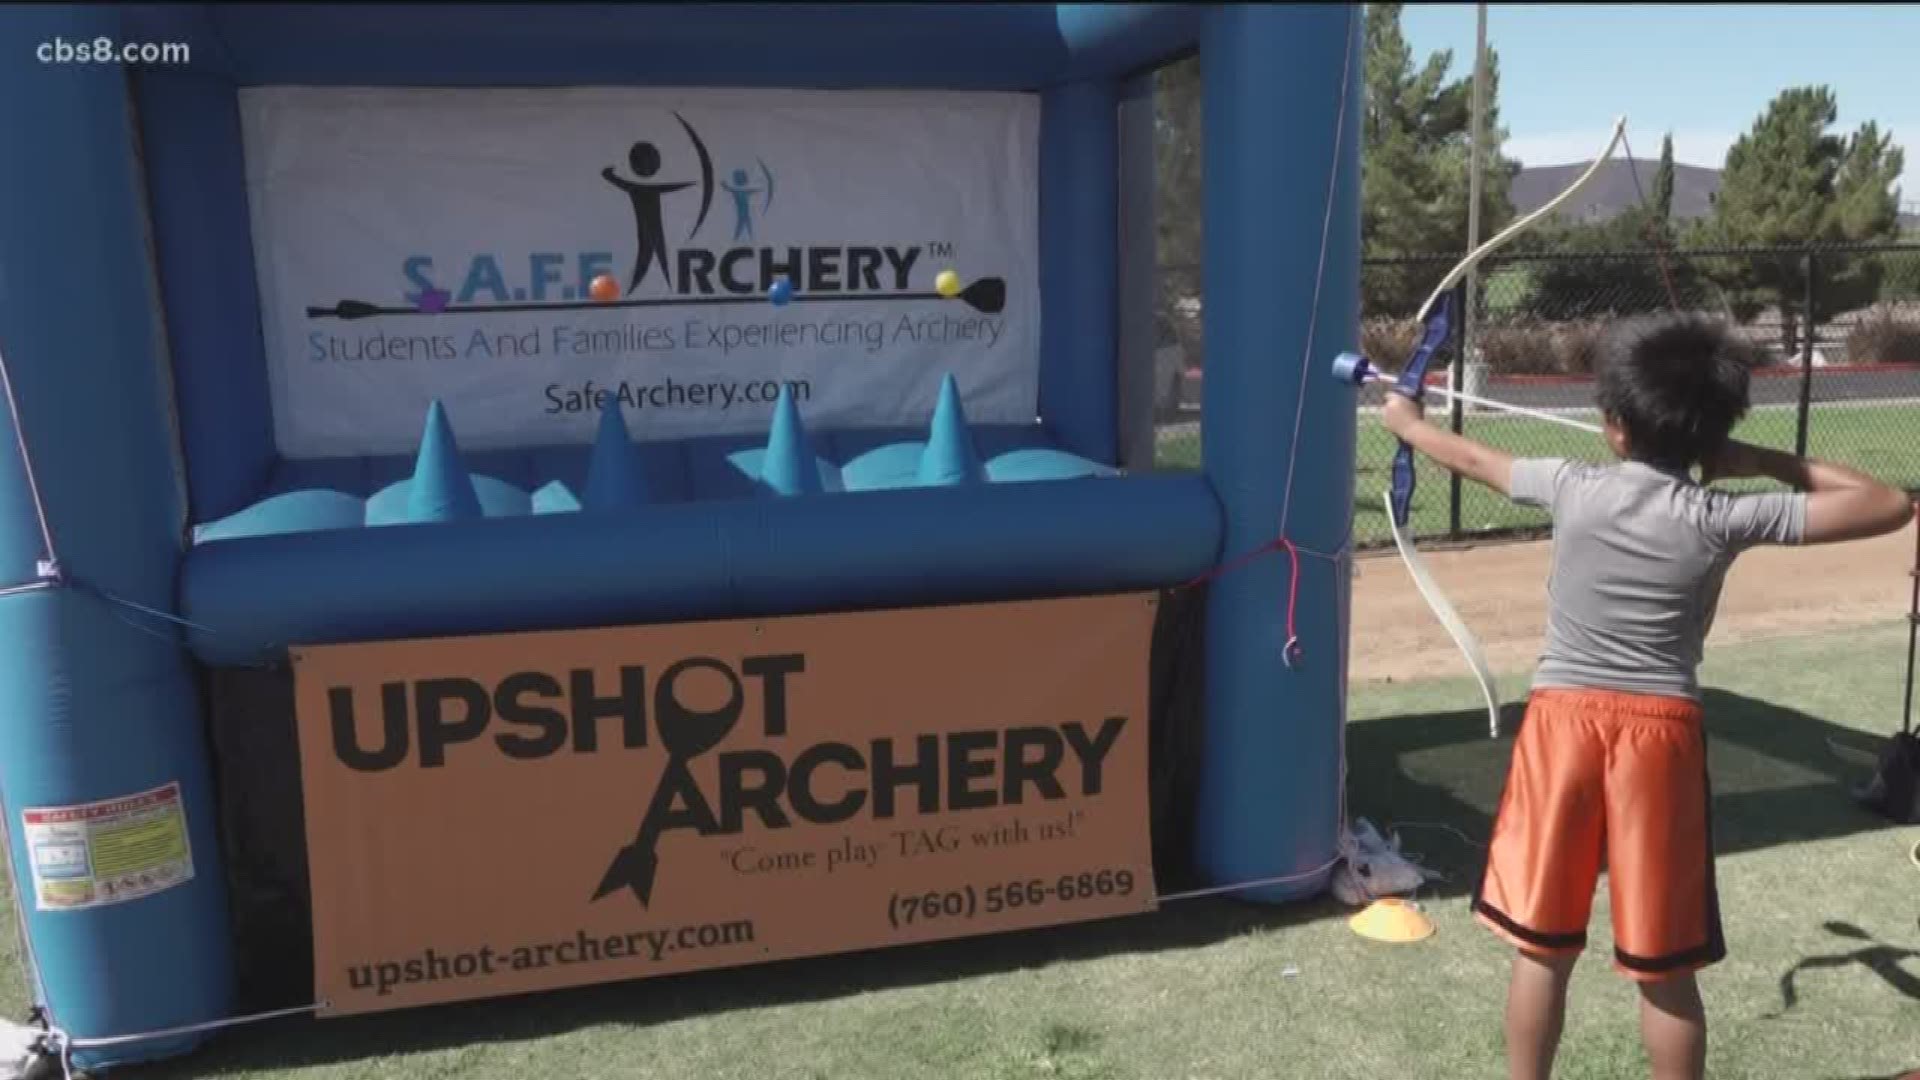 A crazy mixture of paintball, dodge ball and a whole lot more, archery tag is something truly different and entertaining.